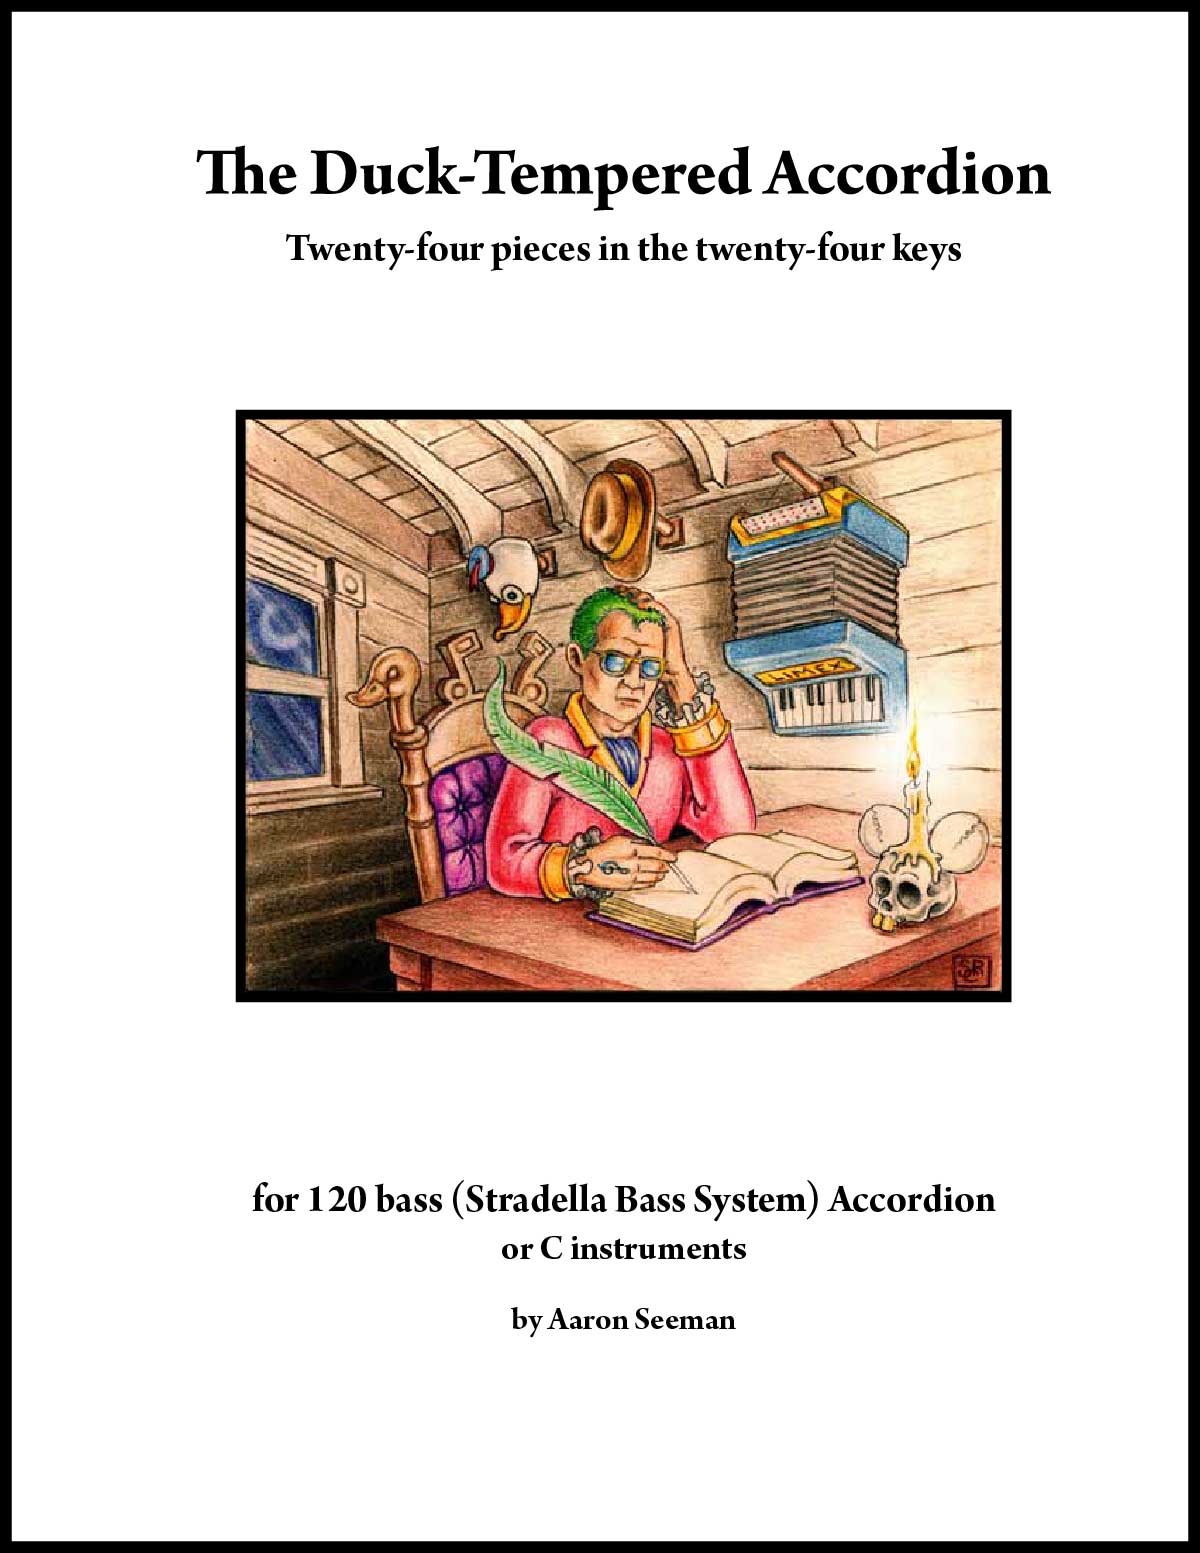 The Duck-Tempered Accordion title page